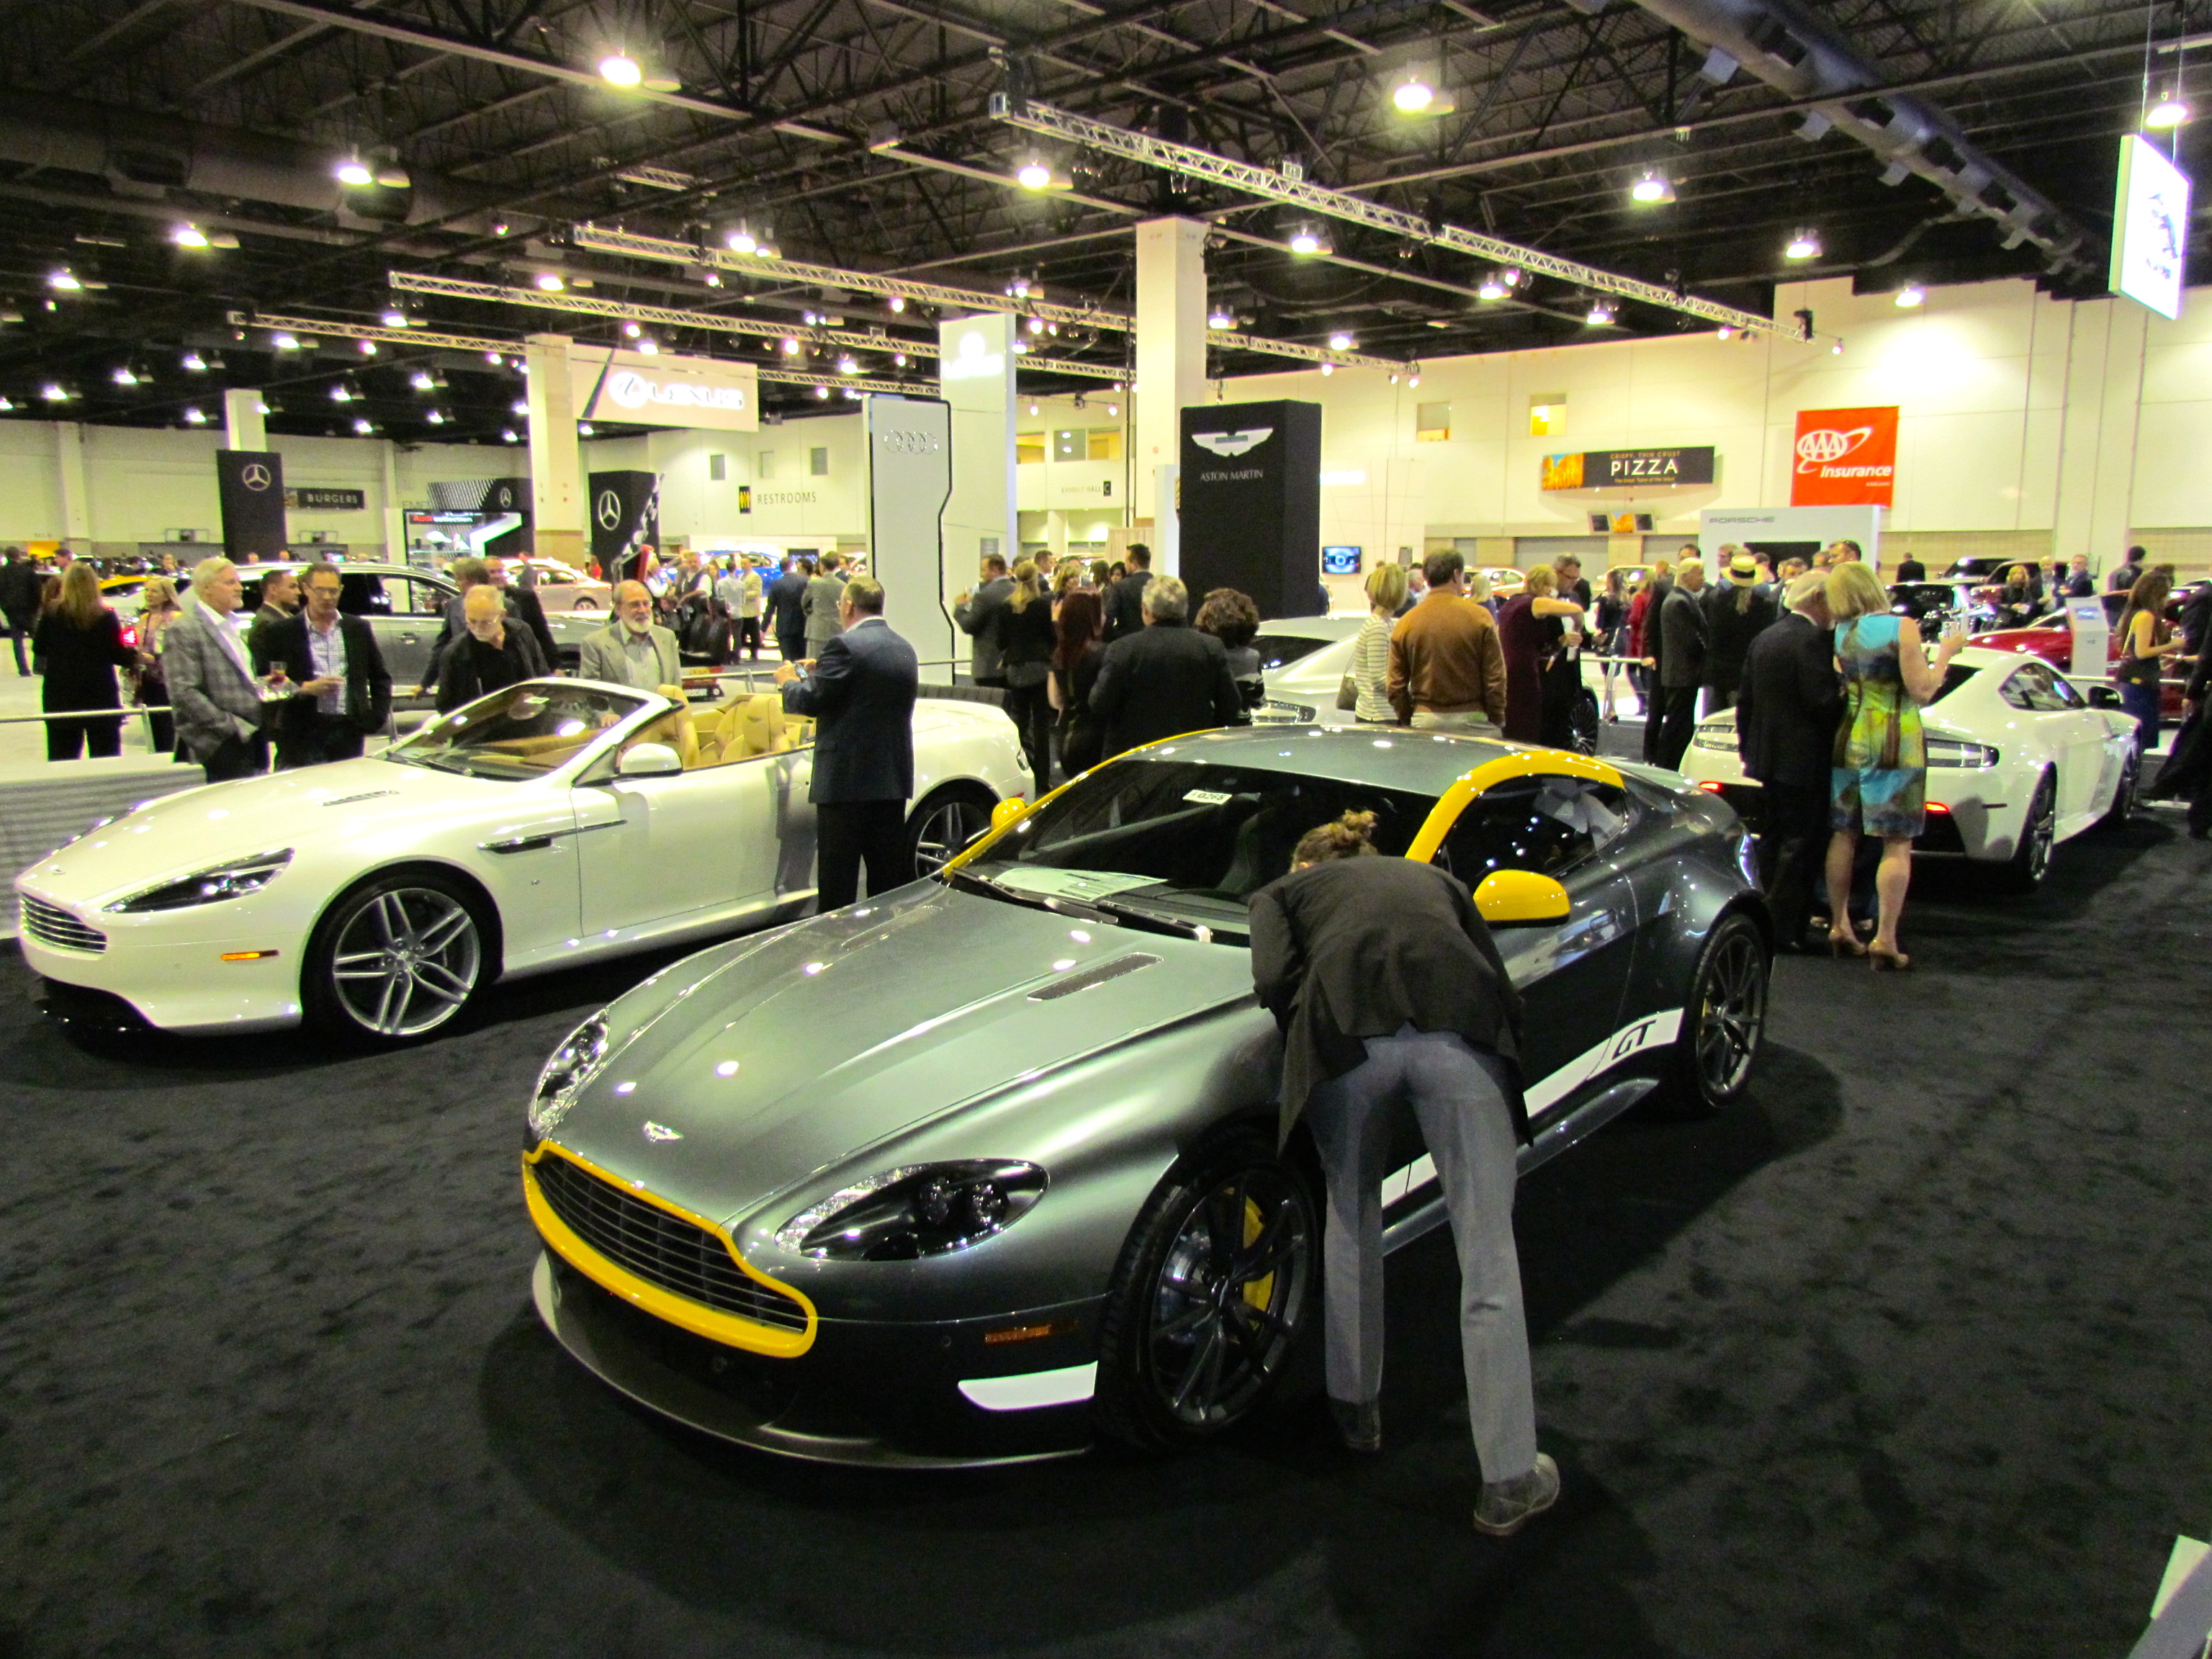 Guests getting the first look before the Denver Auto Show